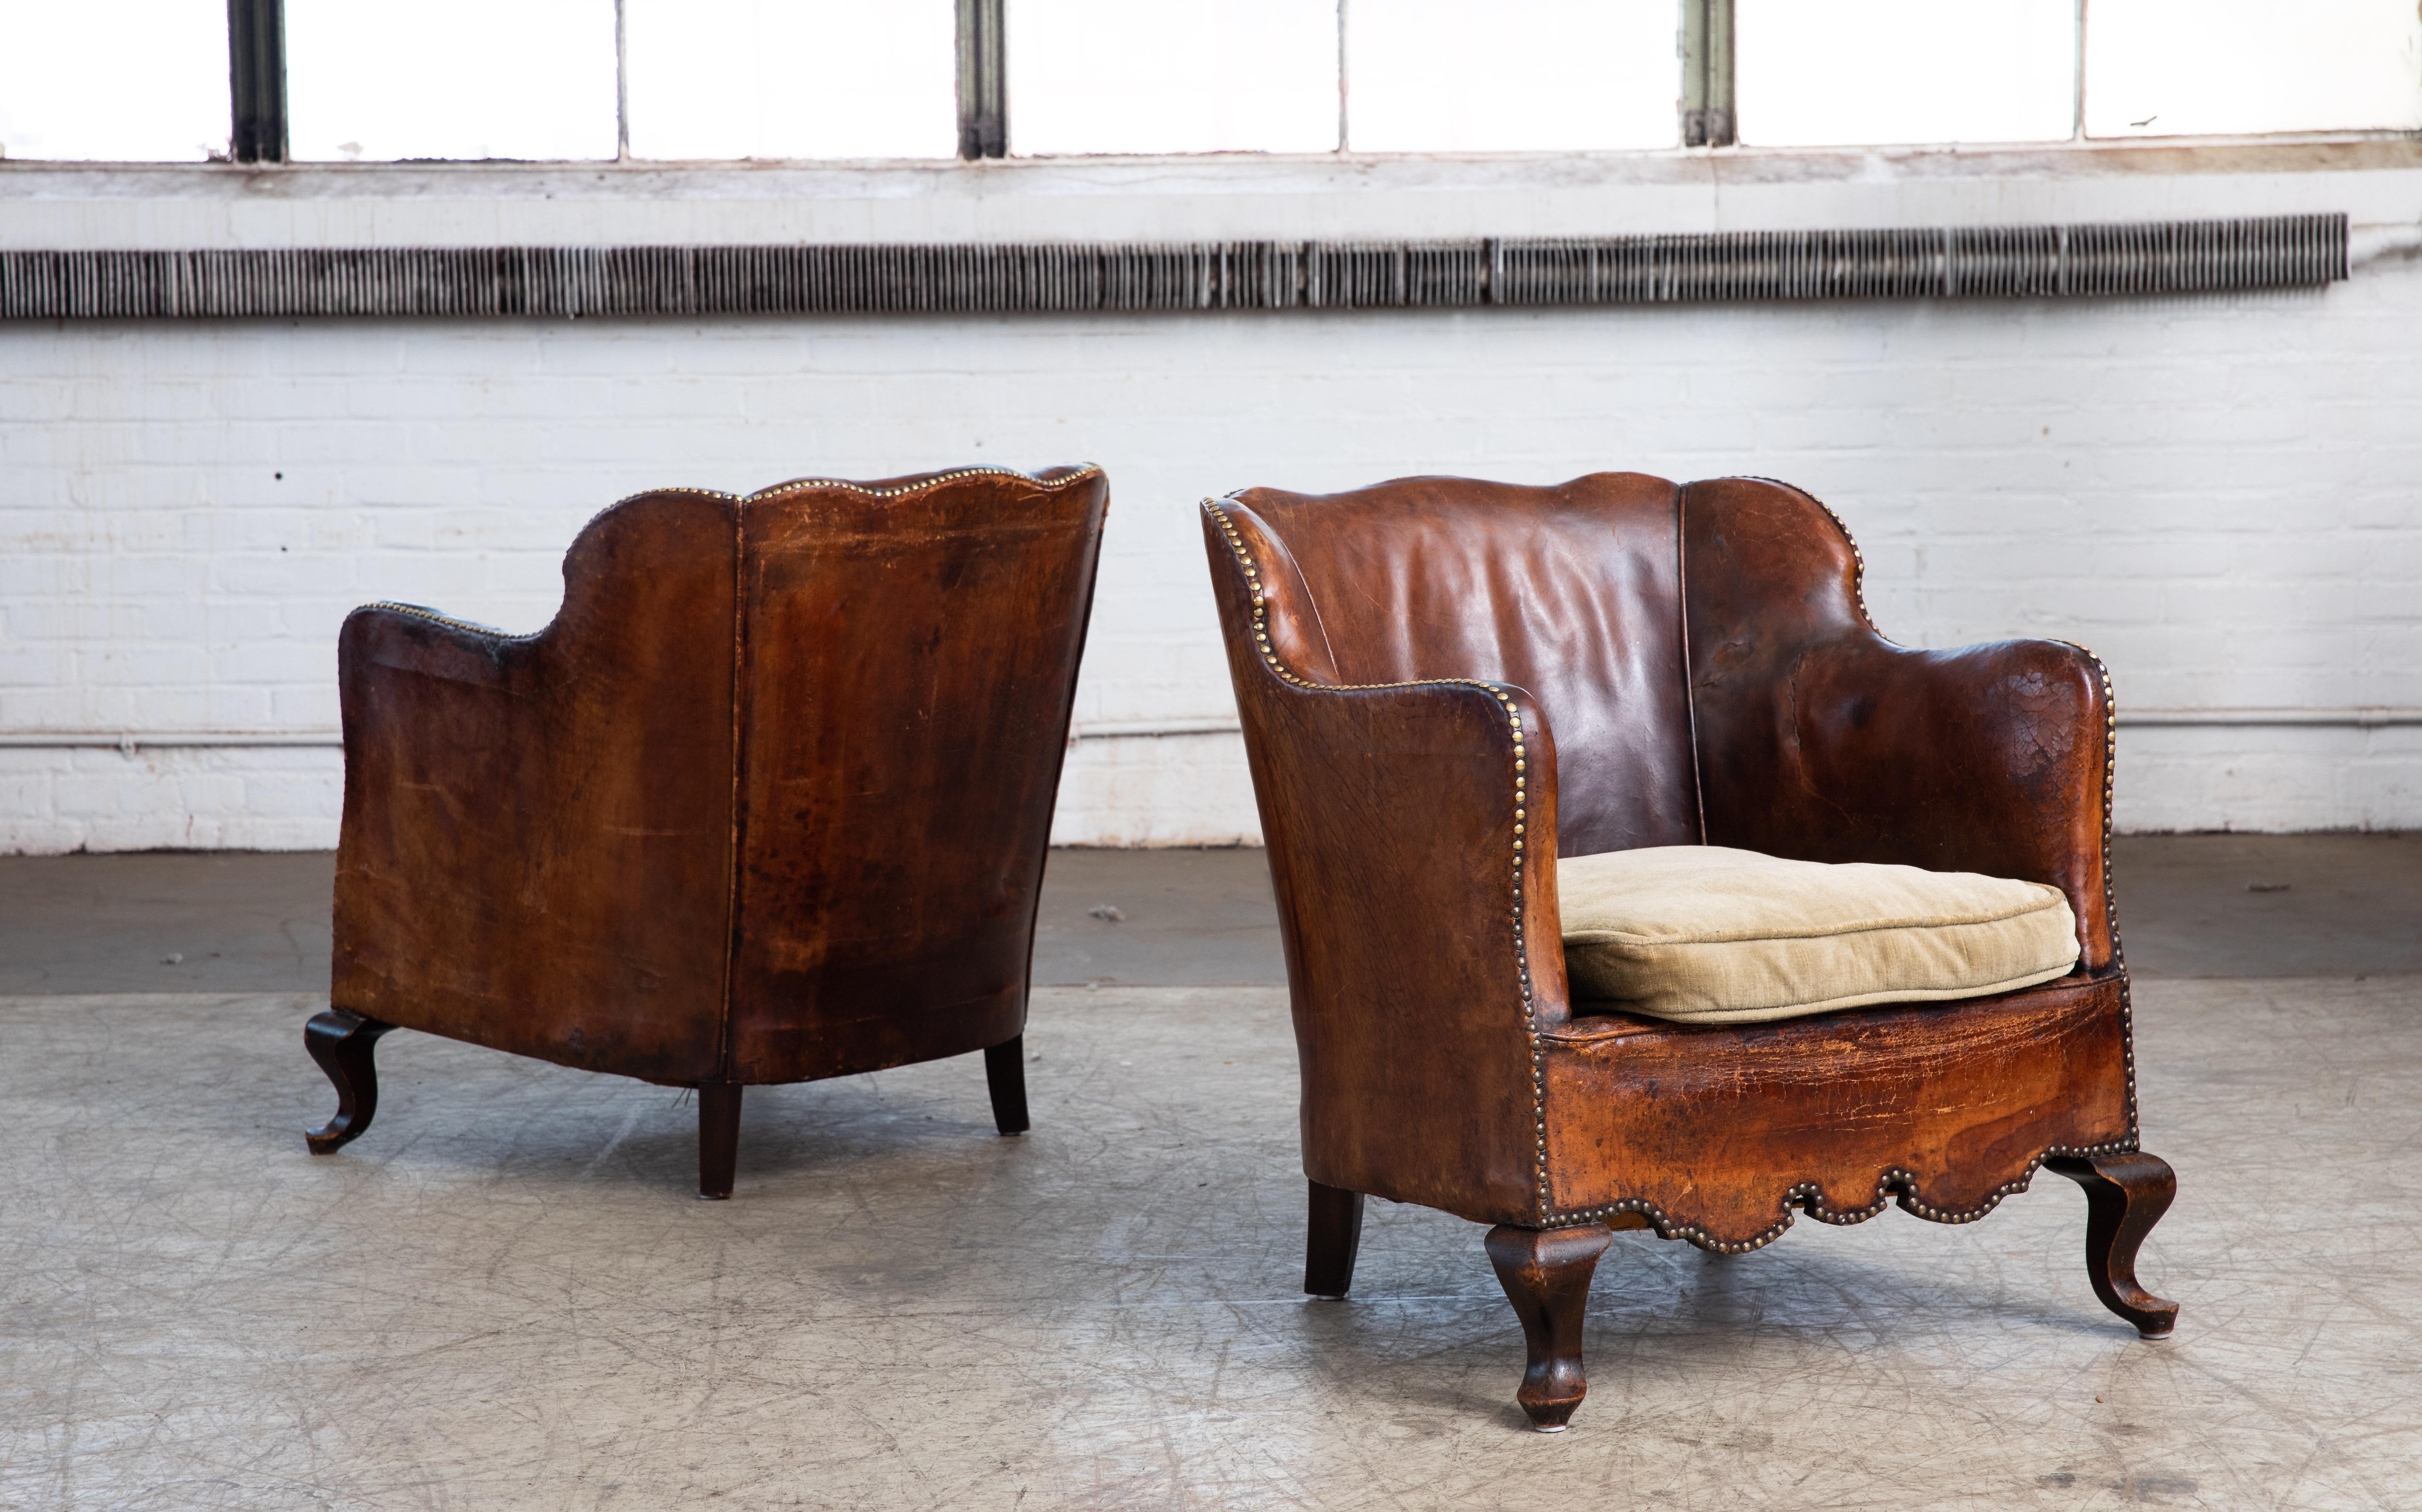 Mid-20th Century Pair of Classic Danish Club or Library Chairs in Cognac Color Patinated Leather